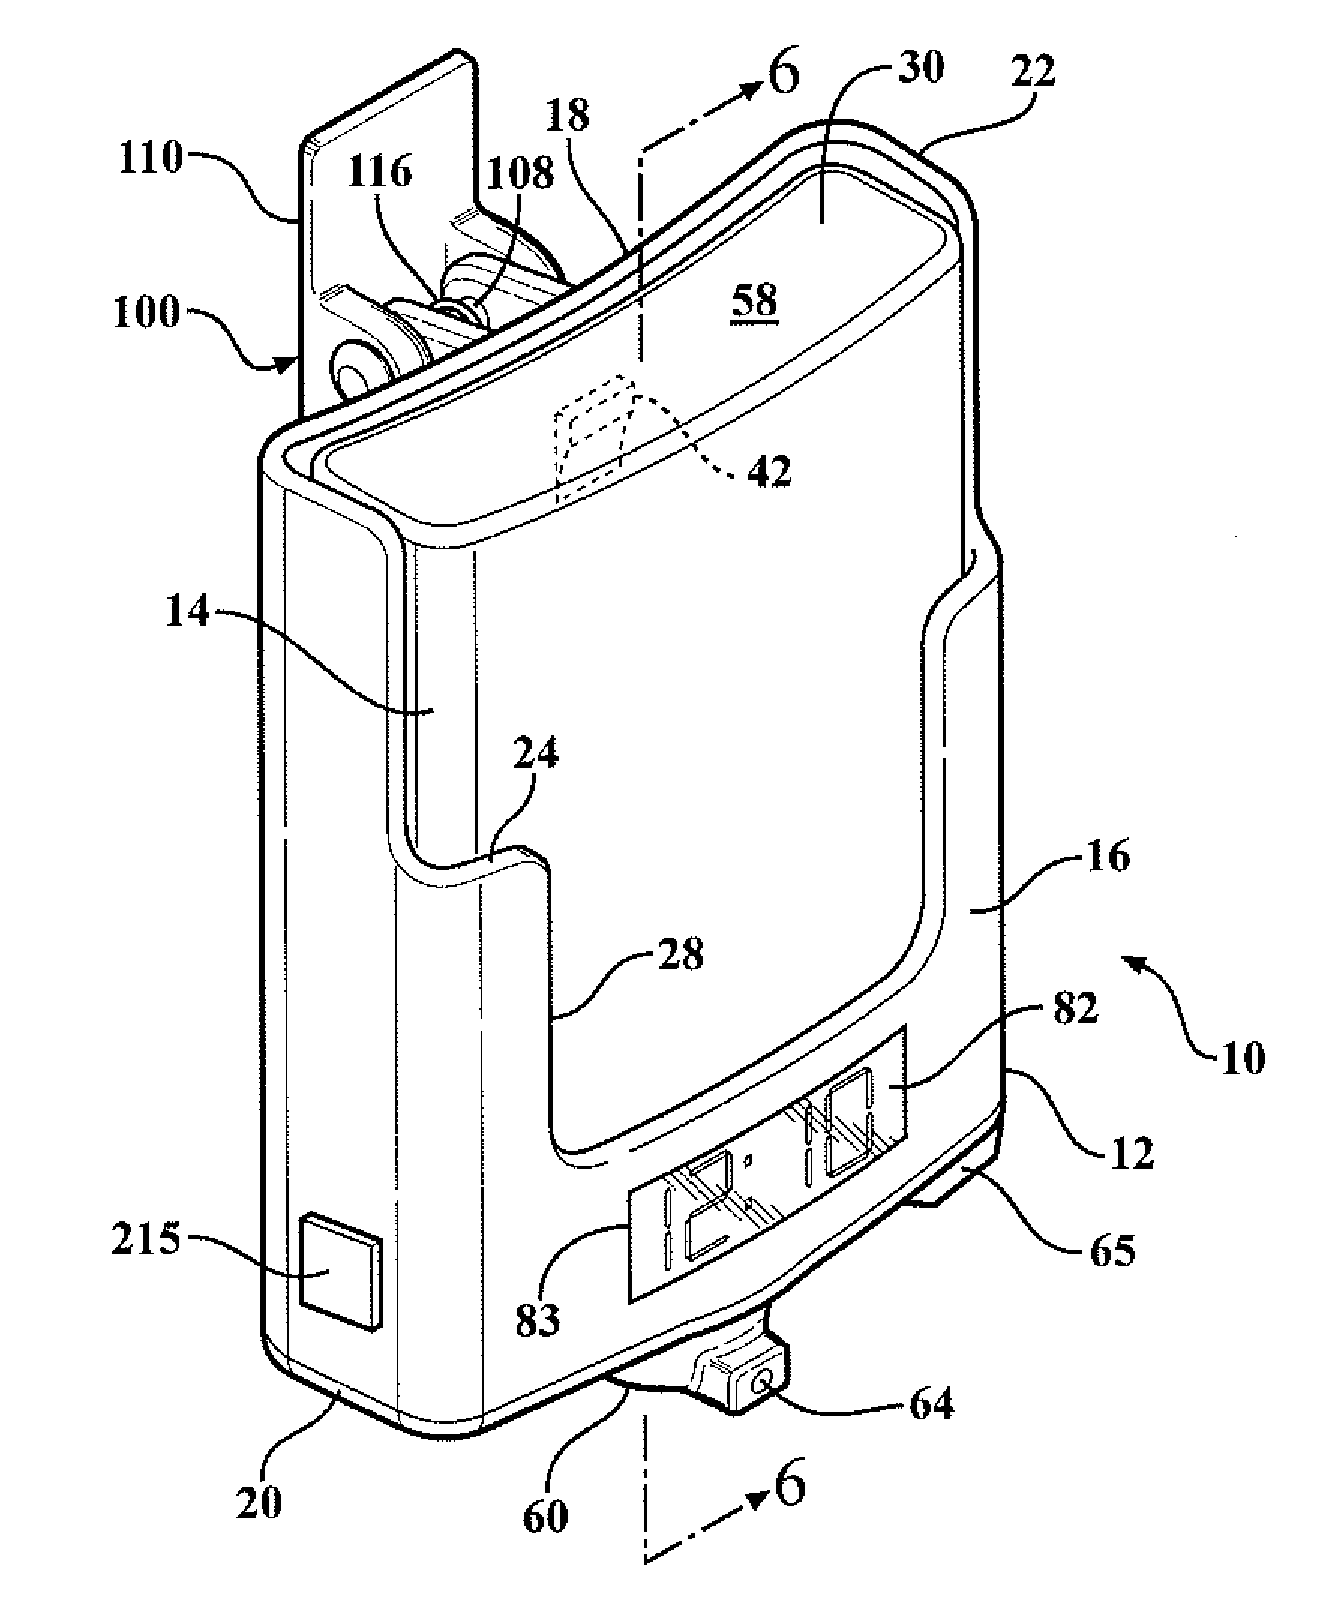 Dispenser Assembly For Dispensing Disinfectant Fluid And Method For Use Thereof And Data Collection And Monitoring System For Monitoring And Reporting Dispensing Events